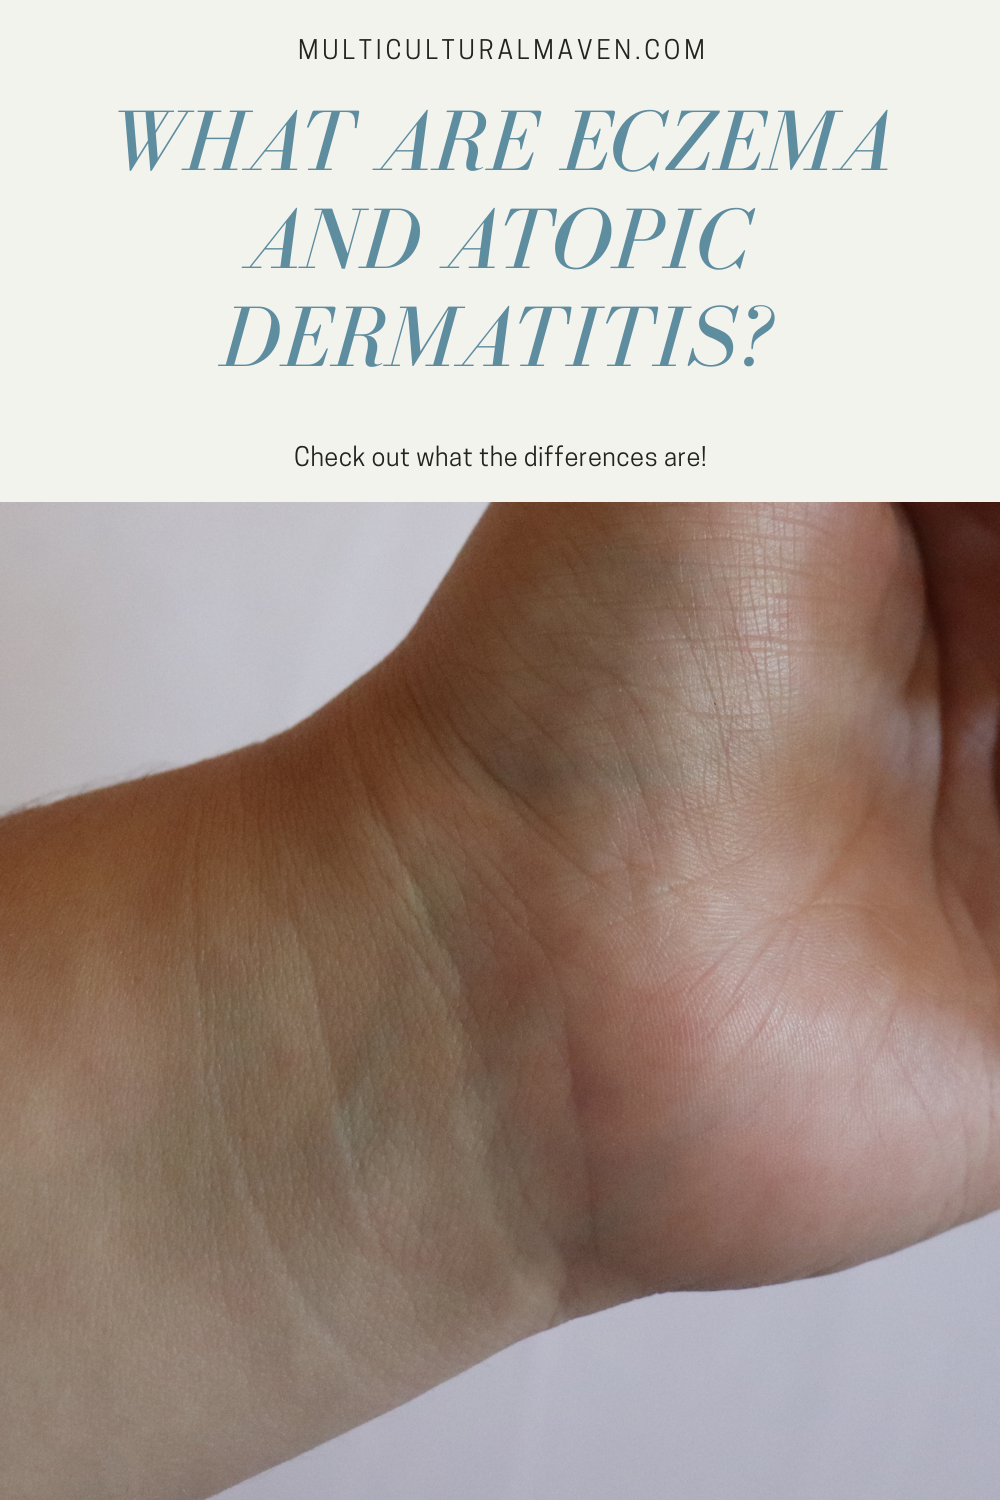 What are eczema and atopic dermatitis?